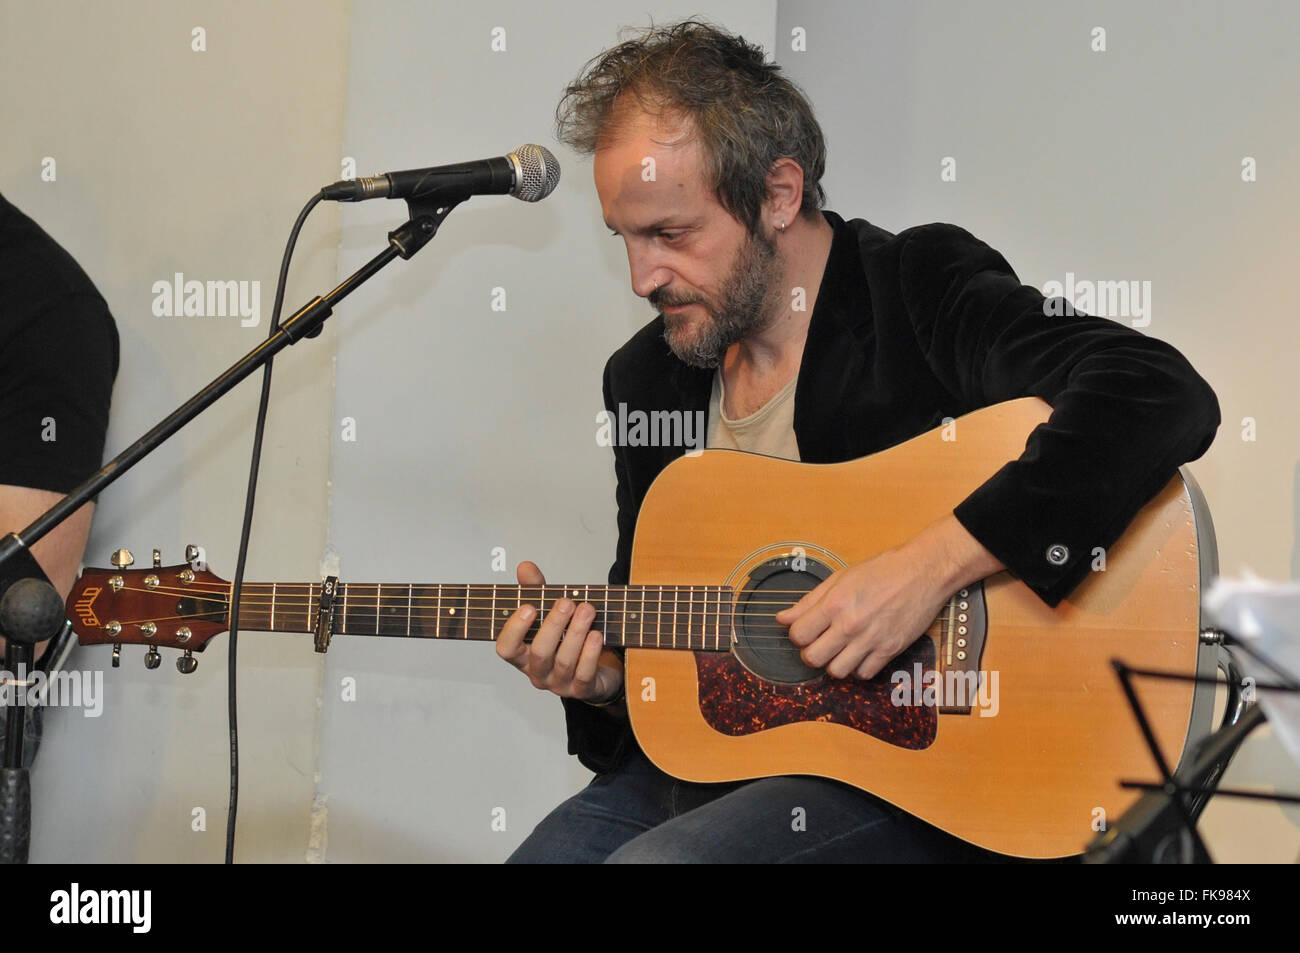 Italian guitarist of Daniele Silvestri during performed live and entertained with the fans at the Feltrinelli bookshop. His latest album 'Acrobati' is in first place in the ranking of best album sellers in Italy. (Photo by Paola Visone / Pacific Press) Stock Photo